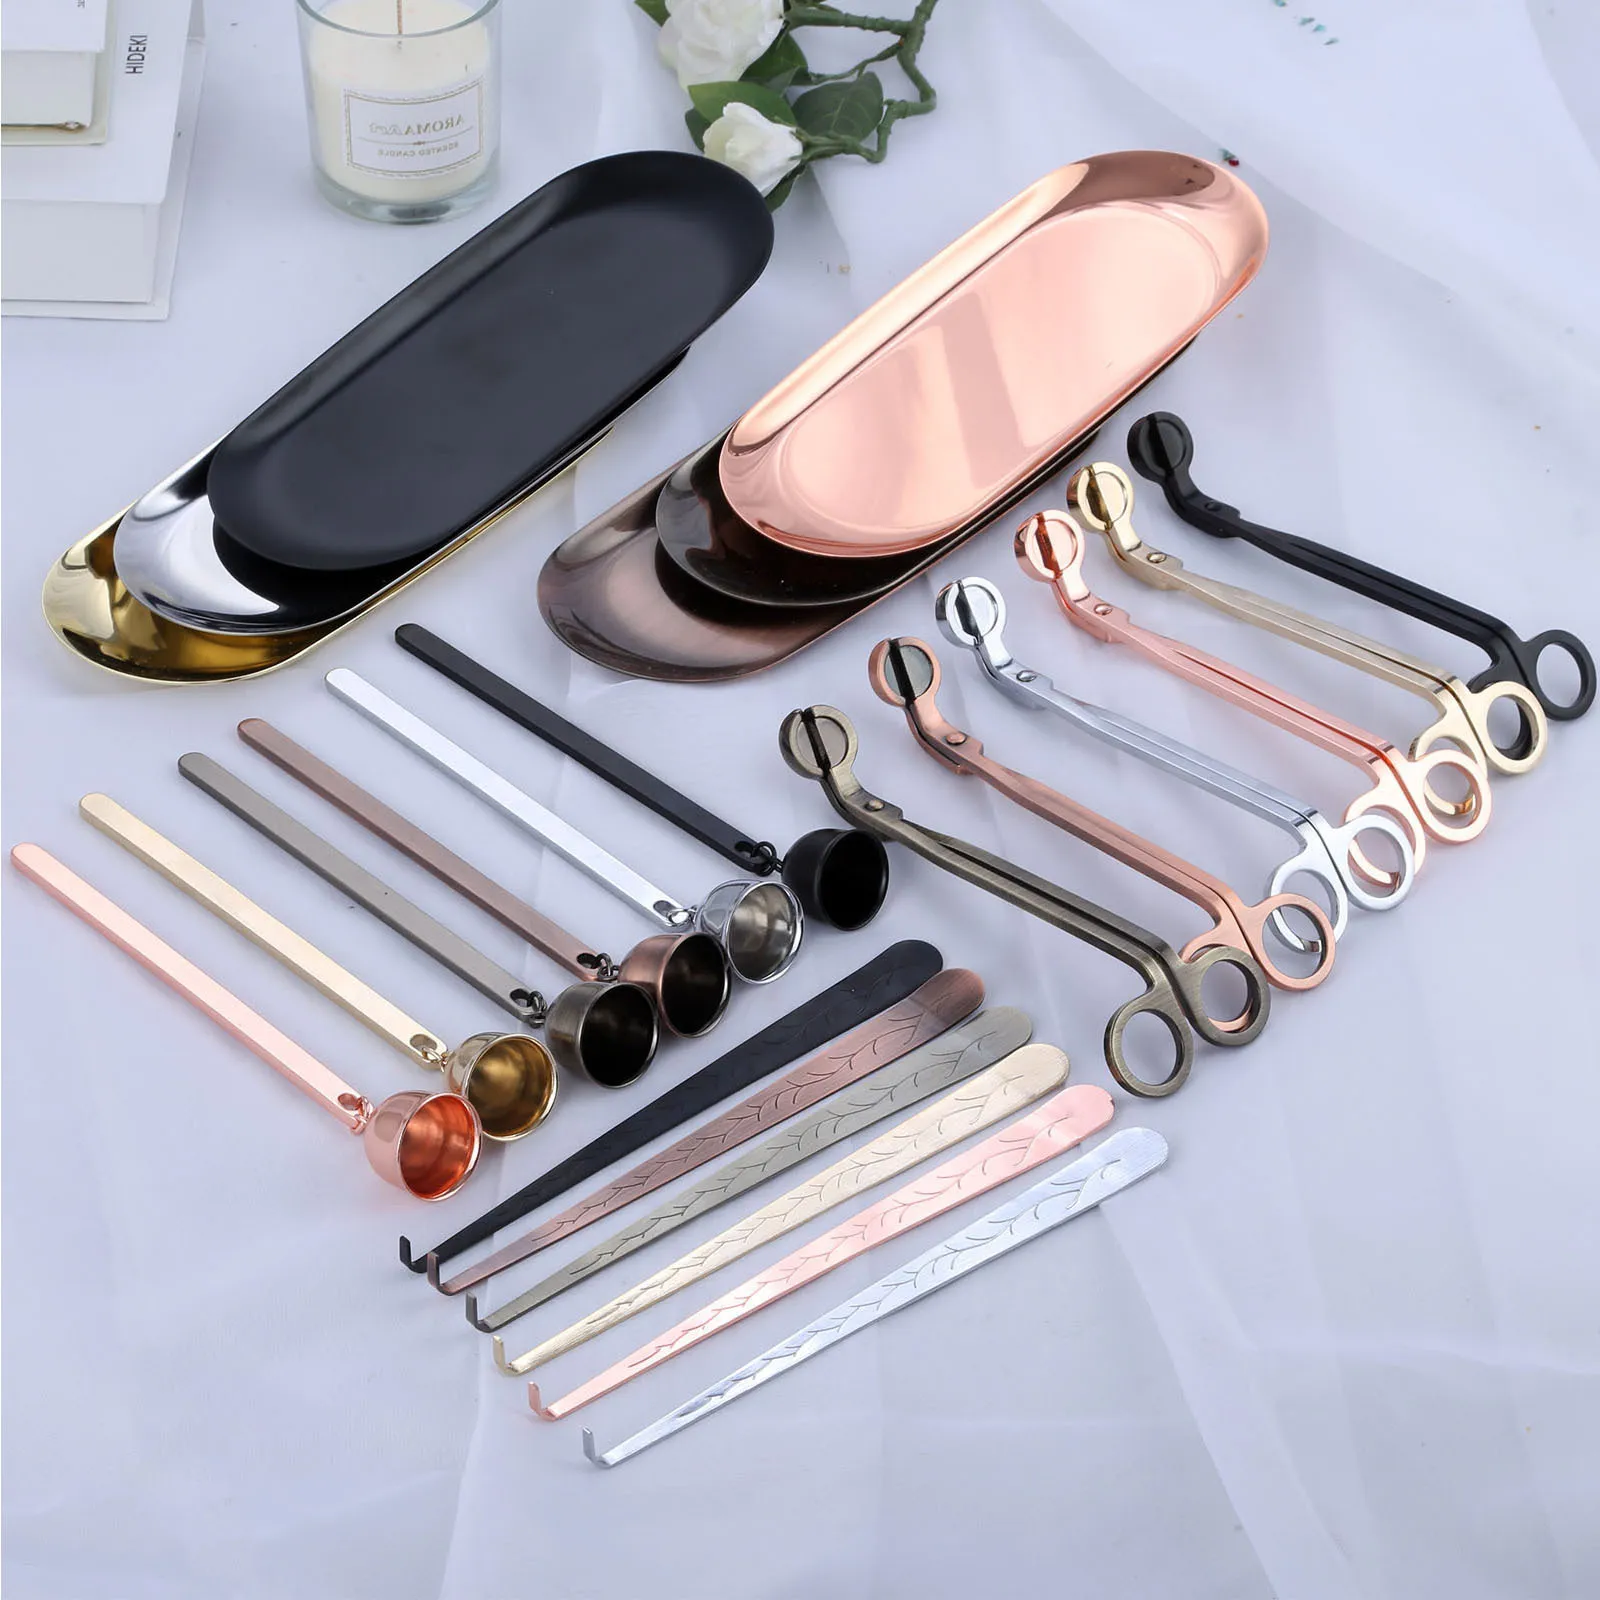 Other Home Garden 4pcsset Candle Accessory Wick Trimmer Dipper Scissors Snuffer Storage Tray Care Kit Gift 221102